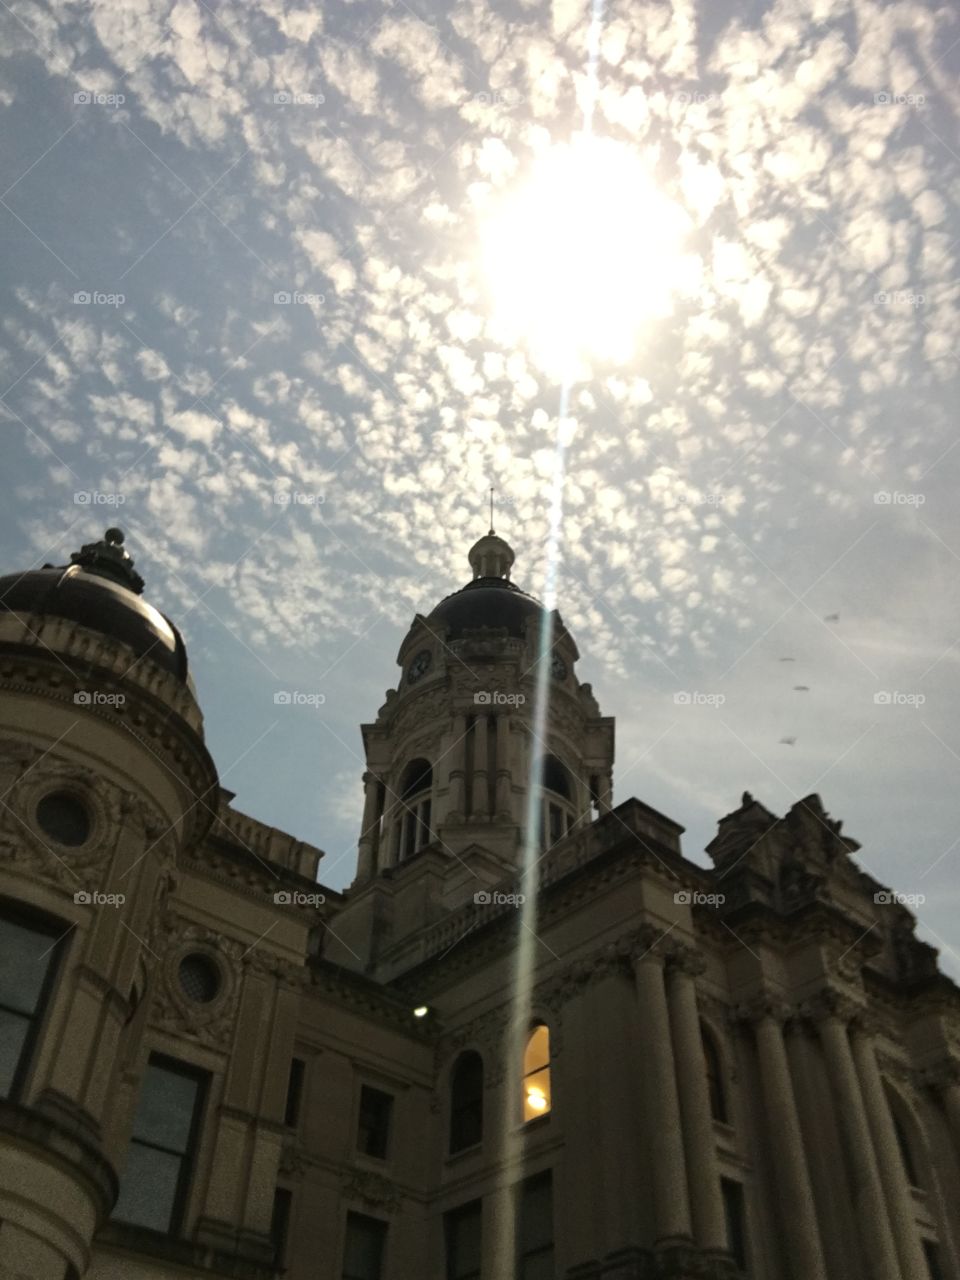 Eclipse 2017 Evansville Indiana courthouse